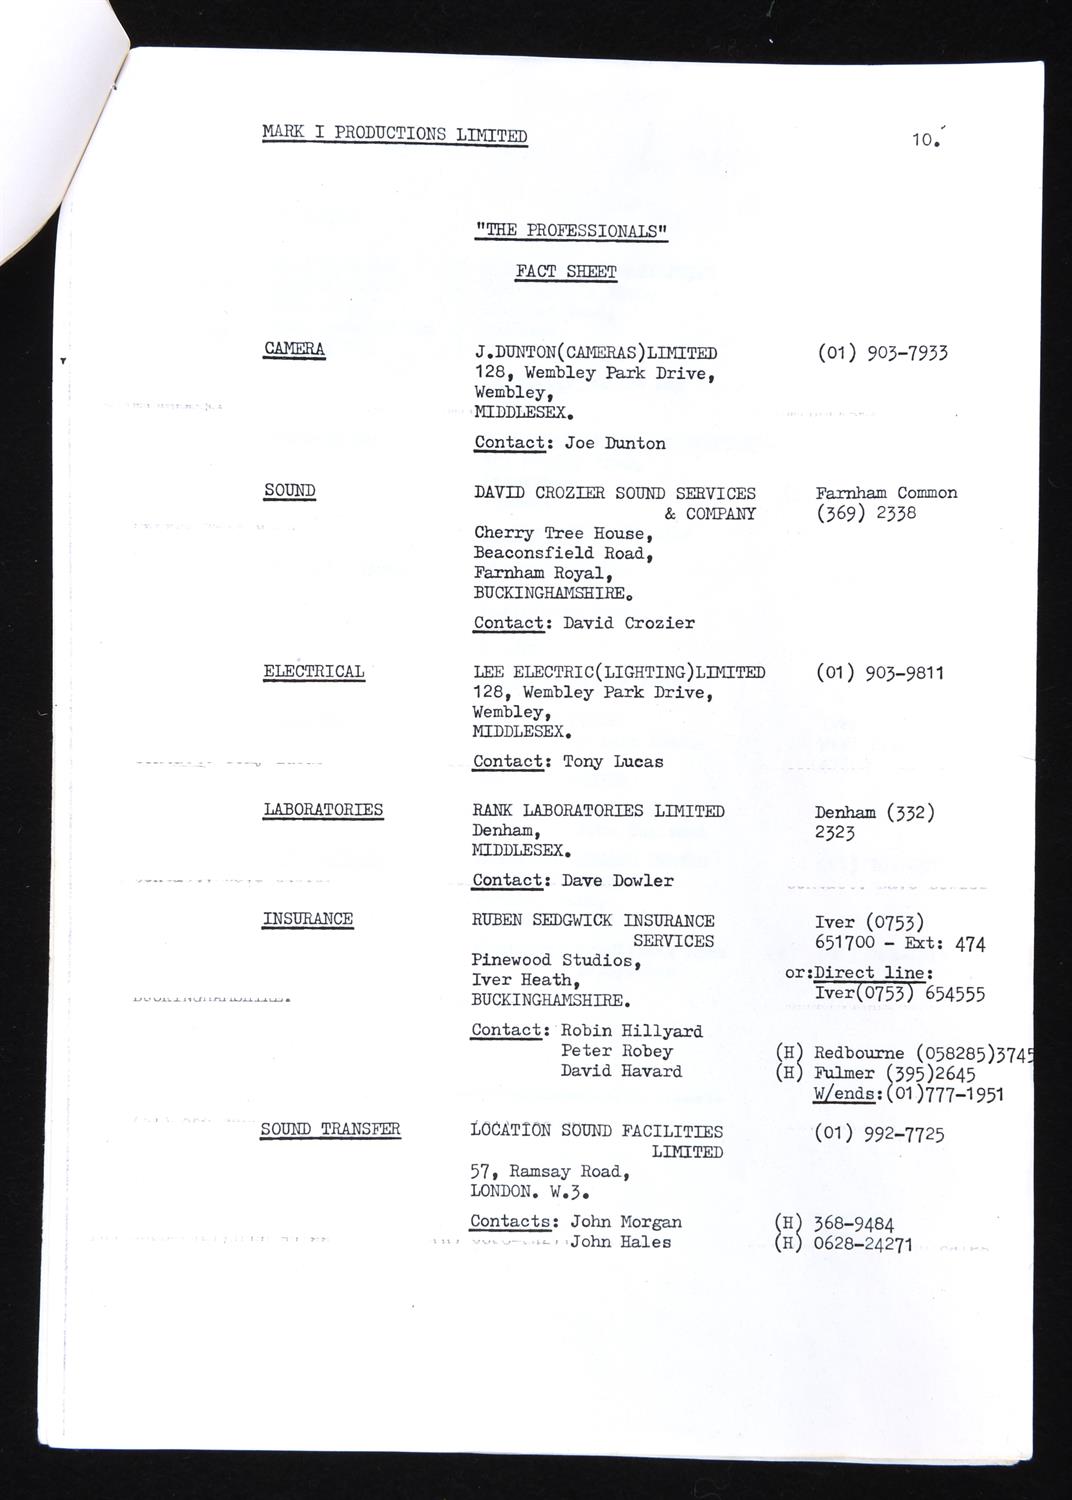 Ci5 The Professionals - Production crew call sheet from 6th March 1979, plus a promotional - Image 3 of 3